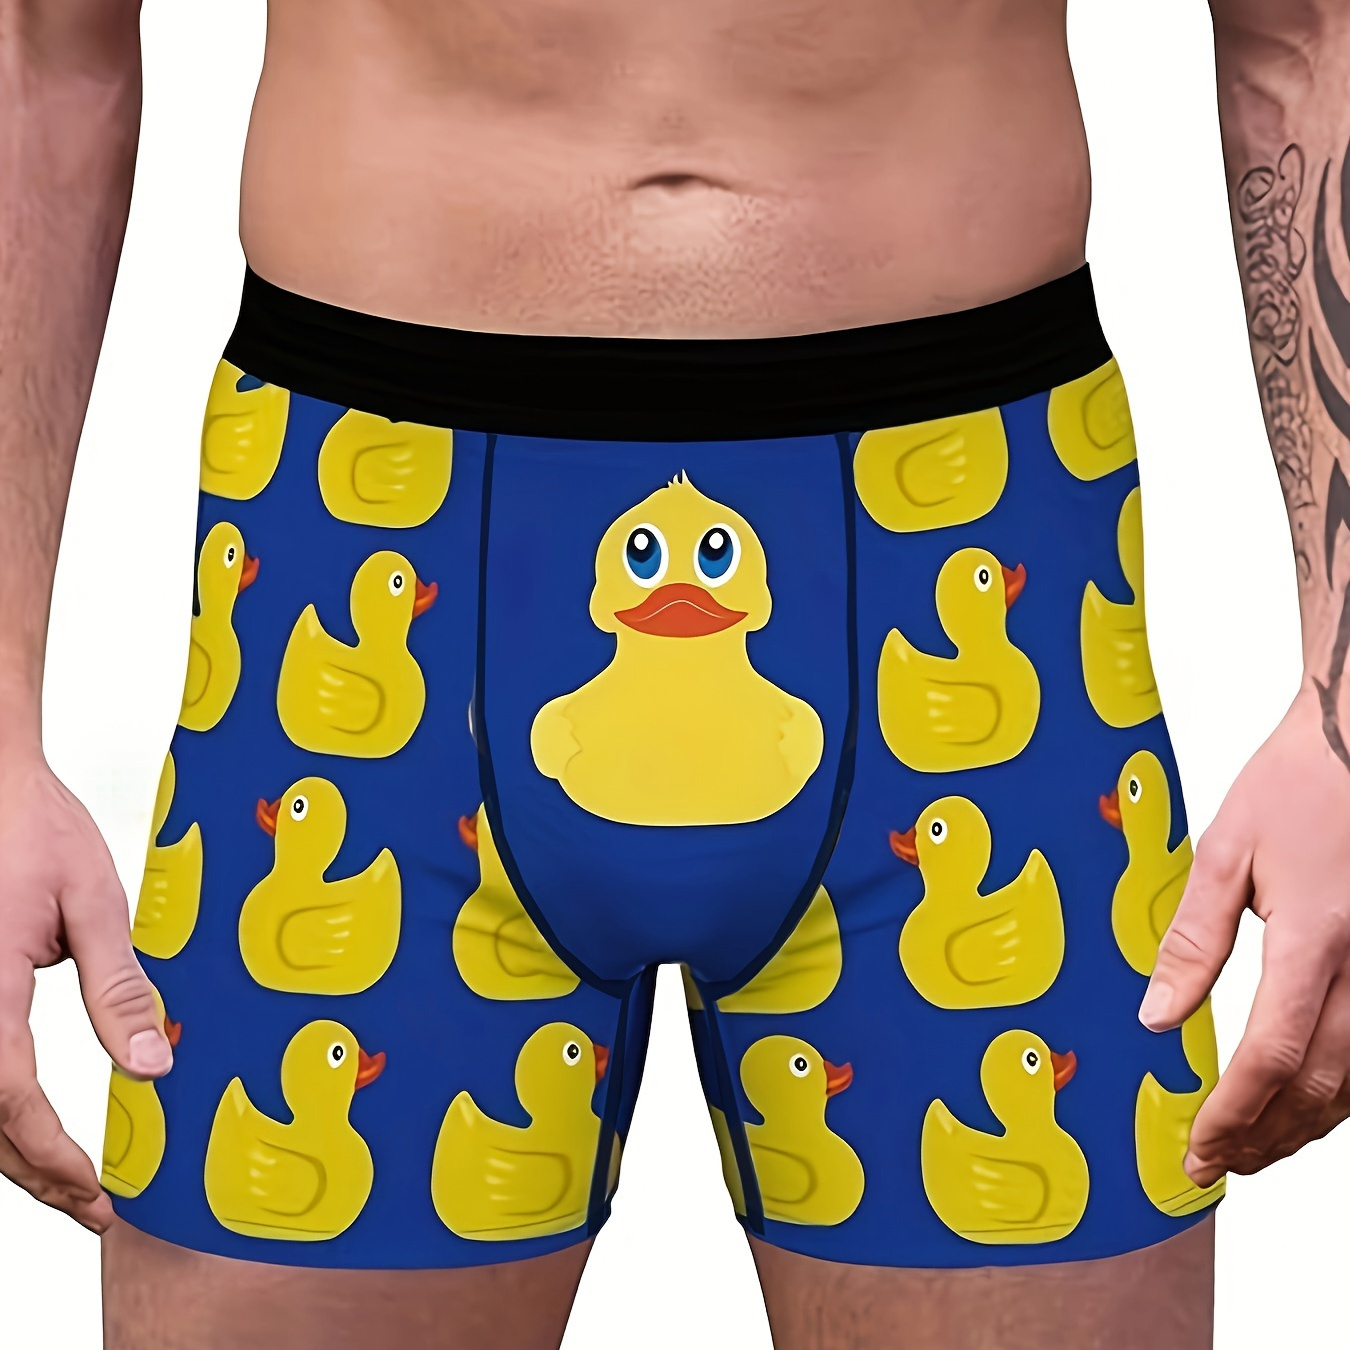 

Duck Print Men's Graphic Long Boxer Briefs Shorts, Breathable Comfy Quick Drying Stretchy Boxer Trunks, Sports Trunks, Swim Trunks For Beach Pool, Men's Novelty Underwear